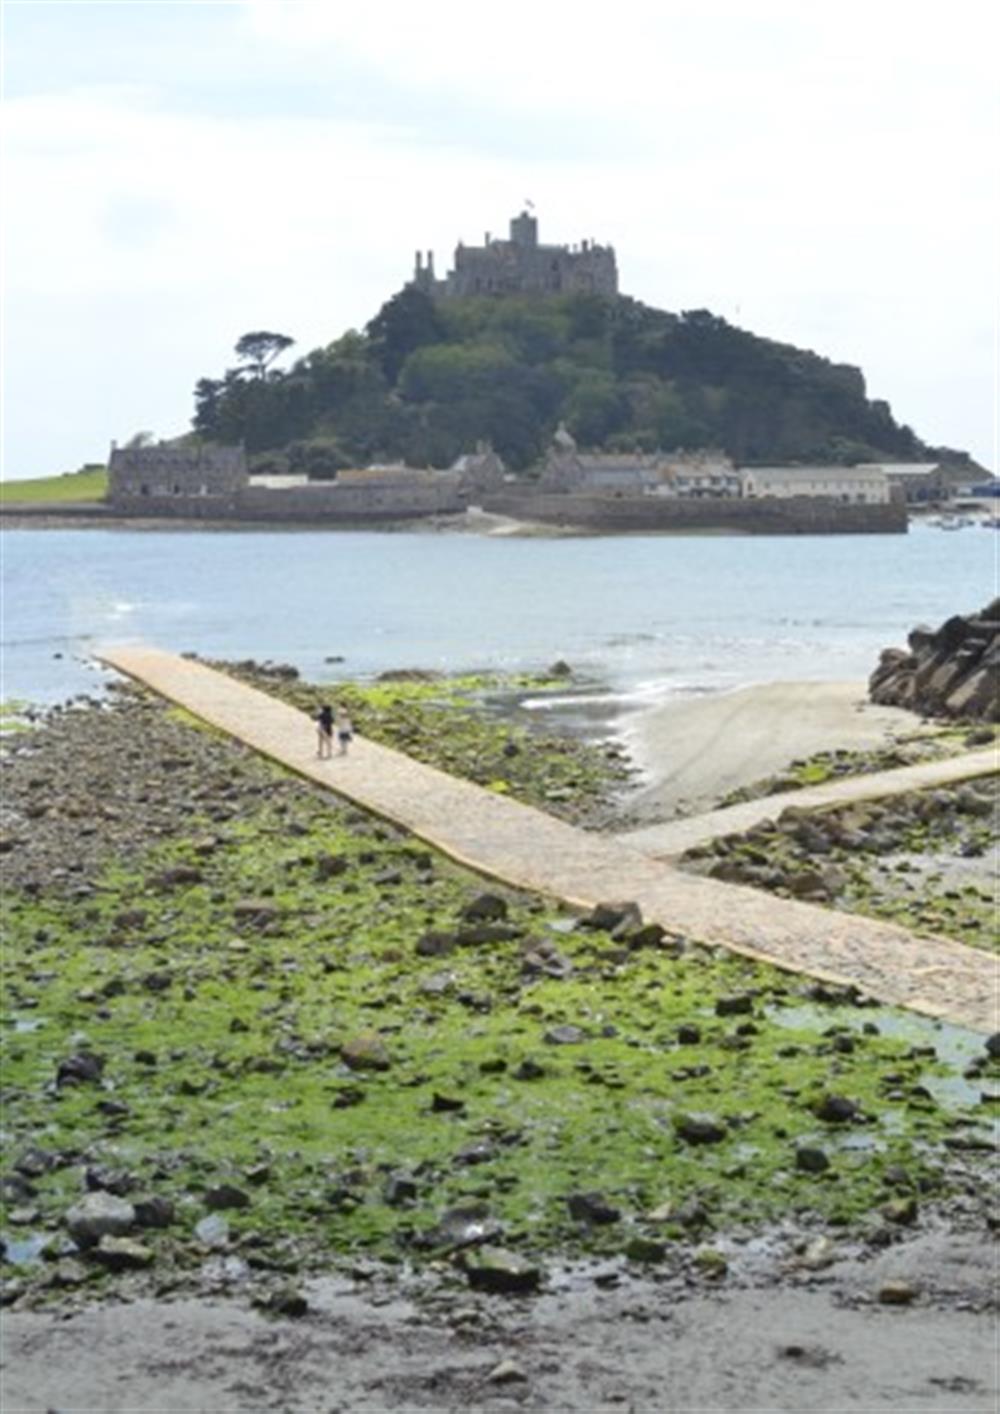 St Michael's Mount is a forty minute drive from The Round Field Annex. Walk across the causeway or catch the water taxi, depending on what the tide's like.